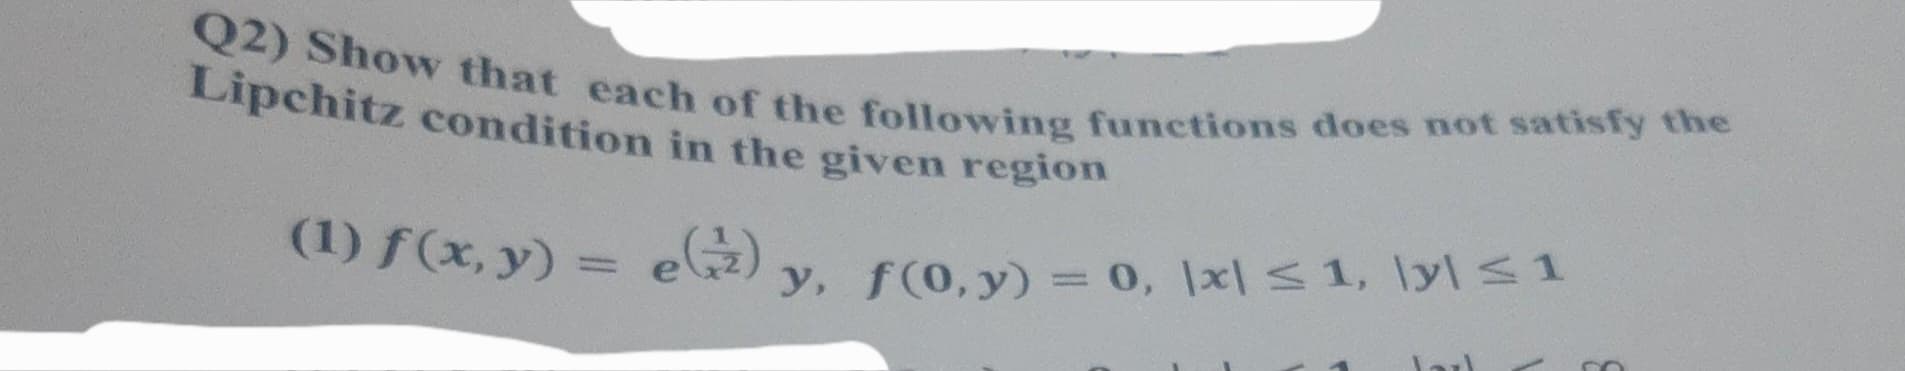 Q2) Show that each of the following functions does not satisfy the
Lipchitz condition in the given region
(1) f(x, y) = e) y, f(0, y) = 0, \x| ≤ 1, \y| ≤ 1
Jarl